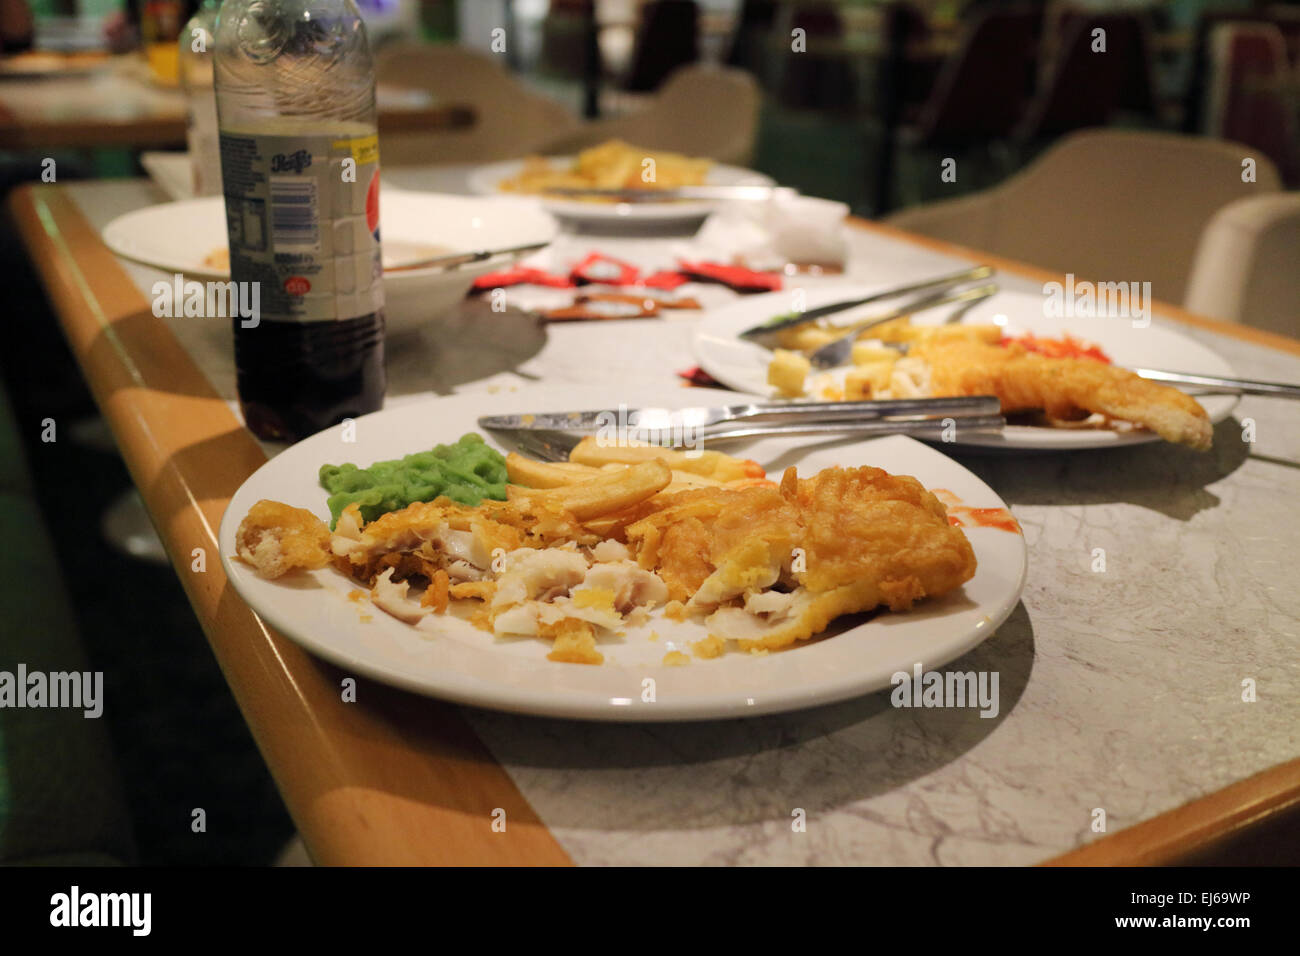 half eaten fish and chips meals in a cafe restaurant in the uk Stock Photo